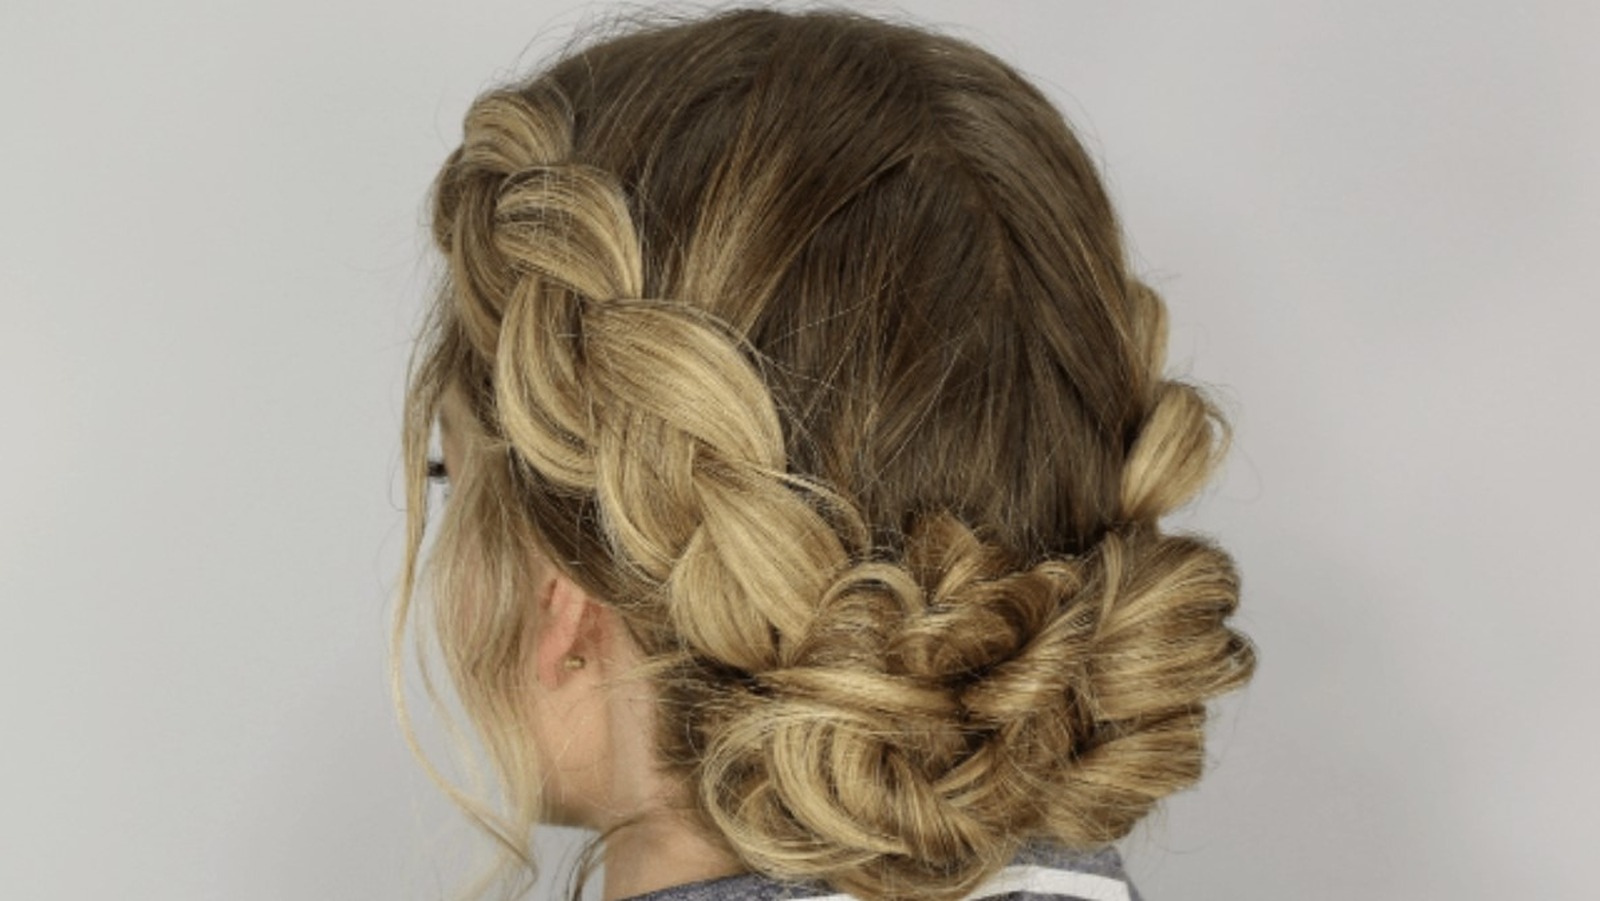 7 Braided Hairstyle Tutorials For Spring That Are Stunning  Haircom By  LOréal